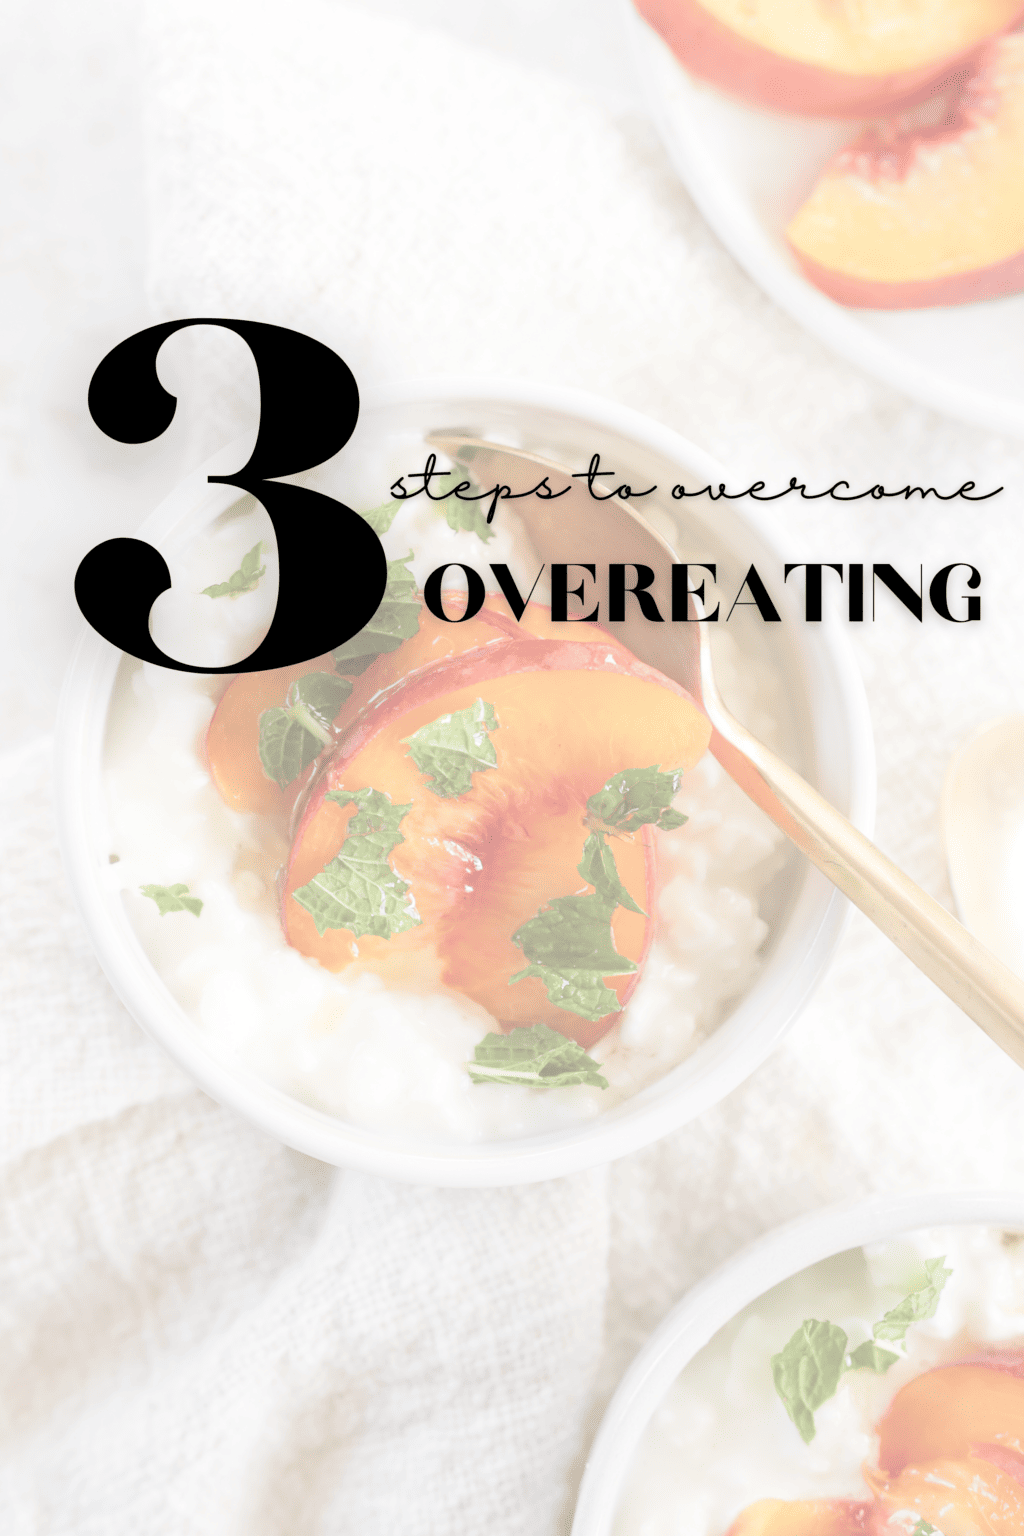 Three white bowls with cottage cheese and mangos with the title "3 steps to overcome overeating".